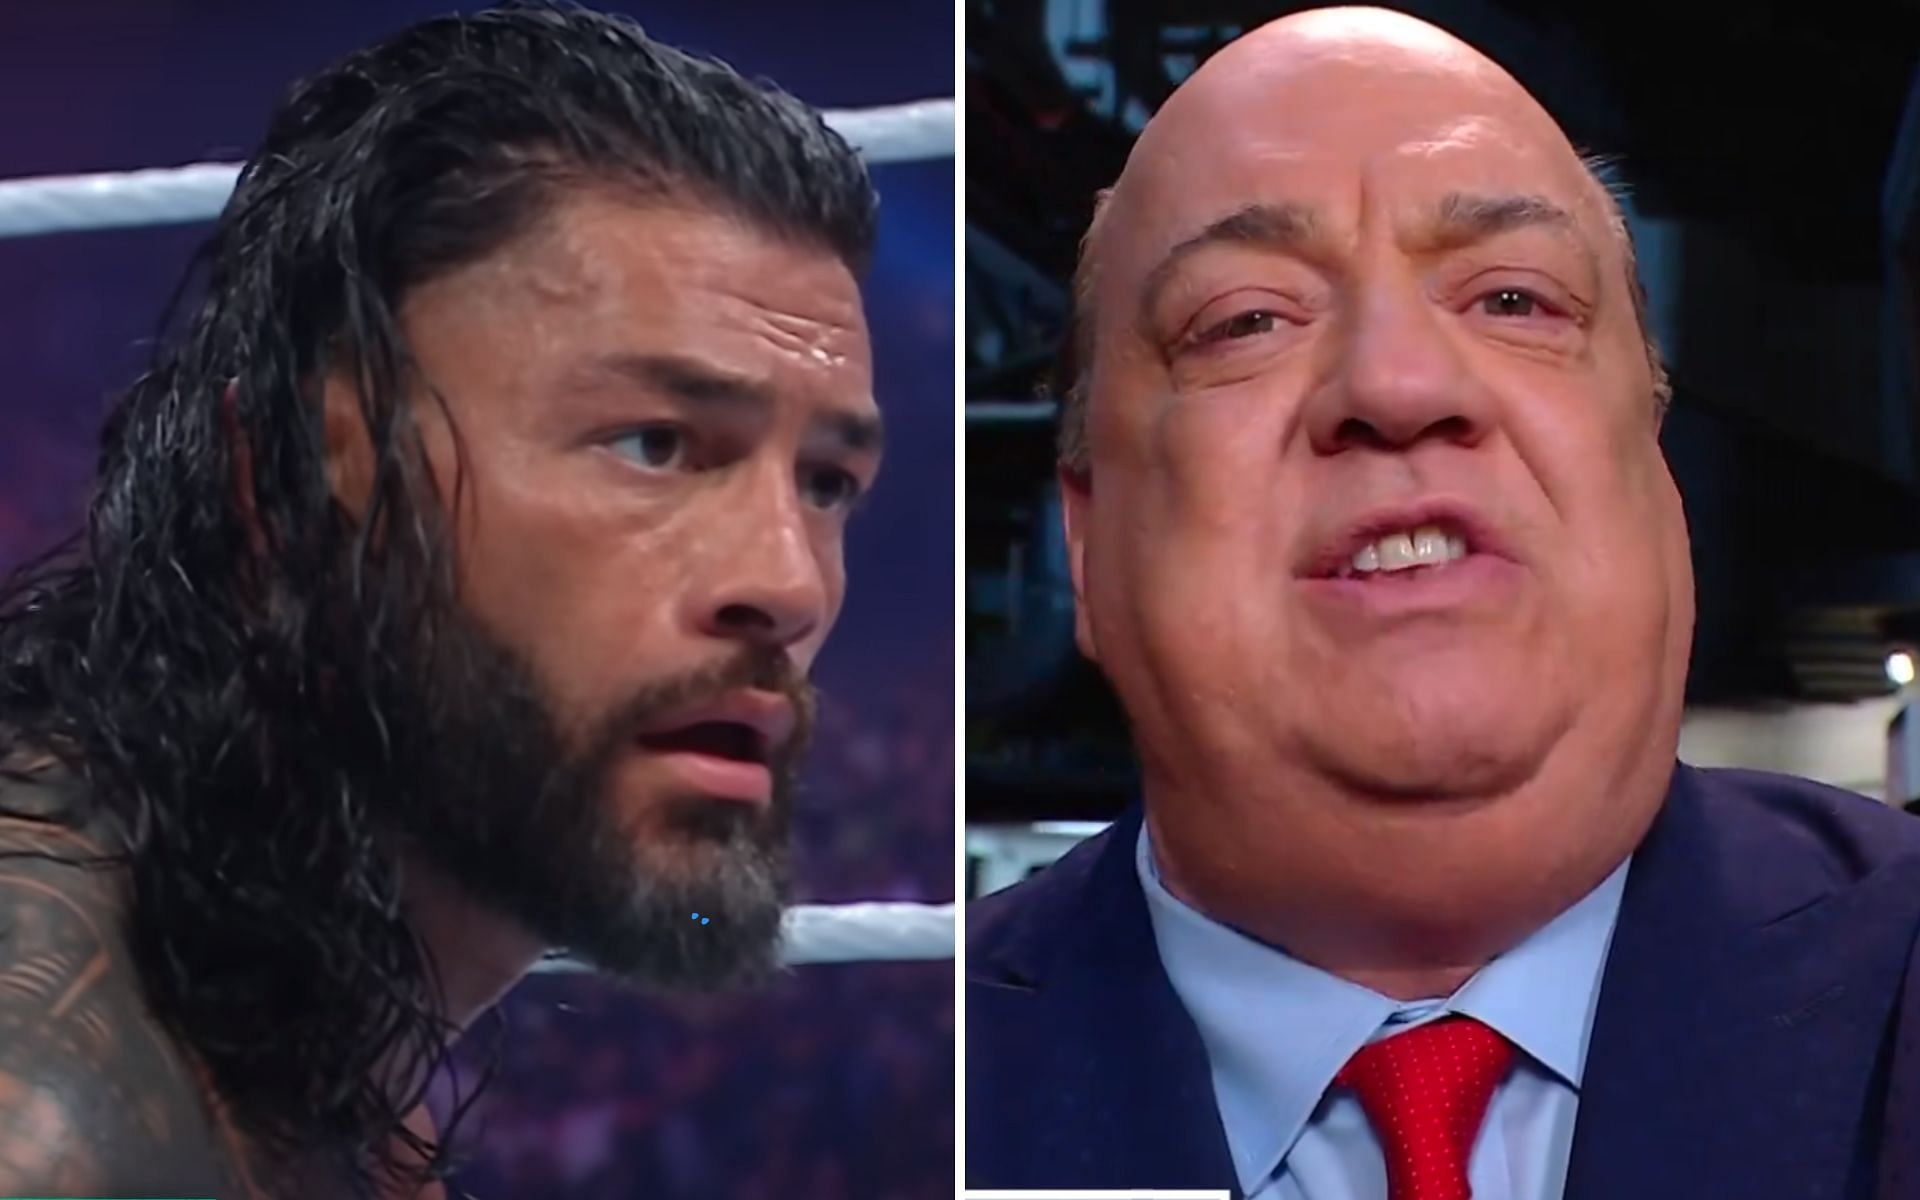 Roman Reigns withdraws from WWE event at the last second; Paul Heyman announces it